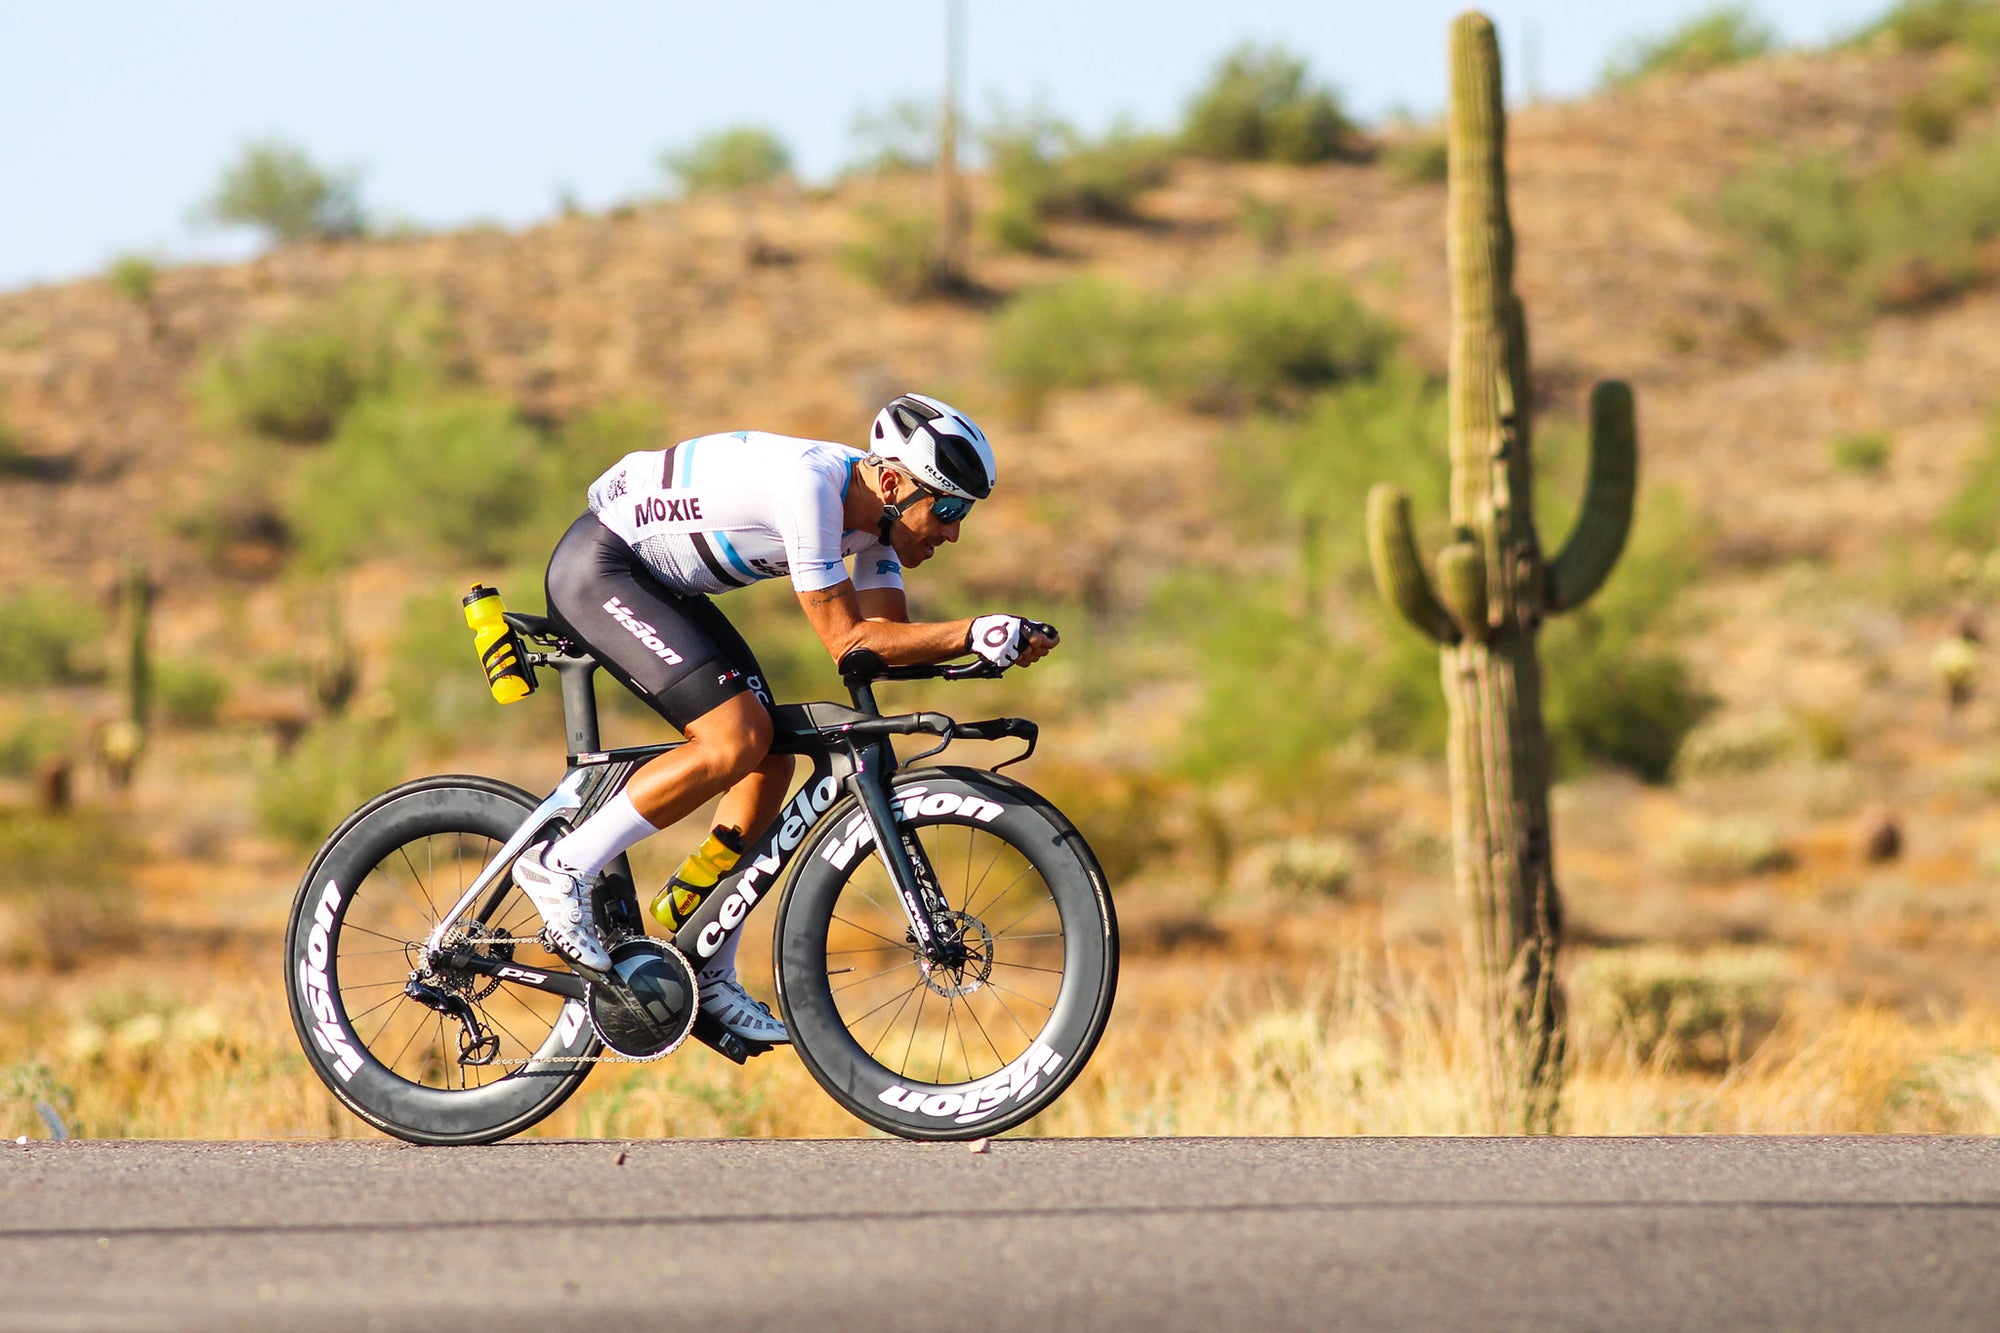 3 Tips For First Time Triathletes from Swiftwick Athlete Pedro Gomes